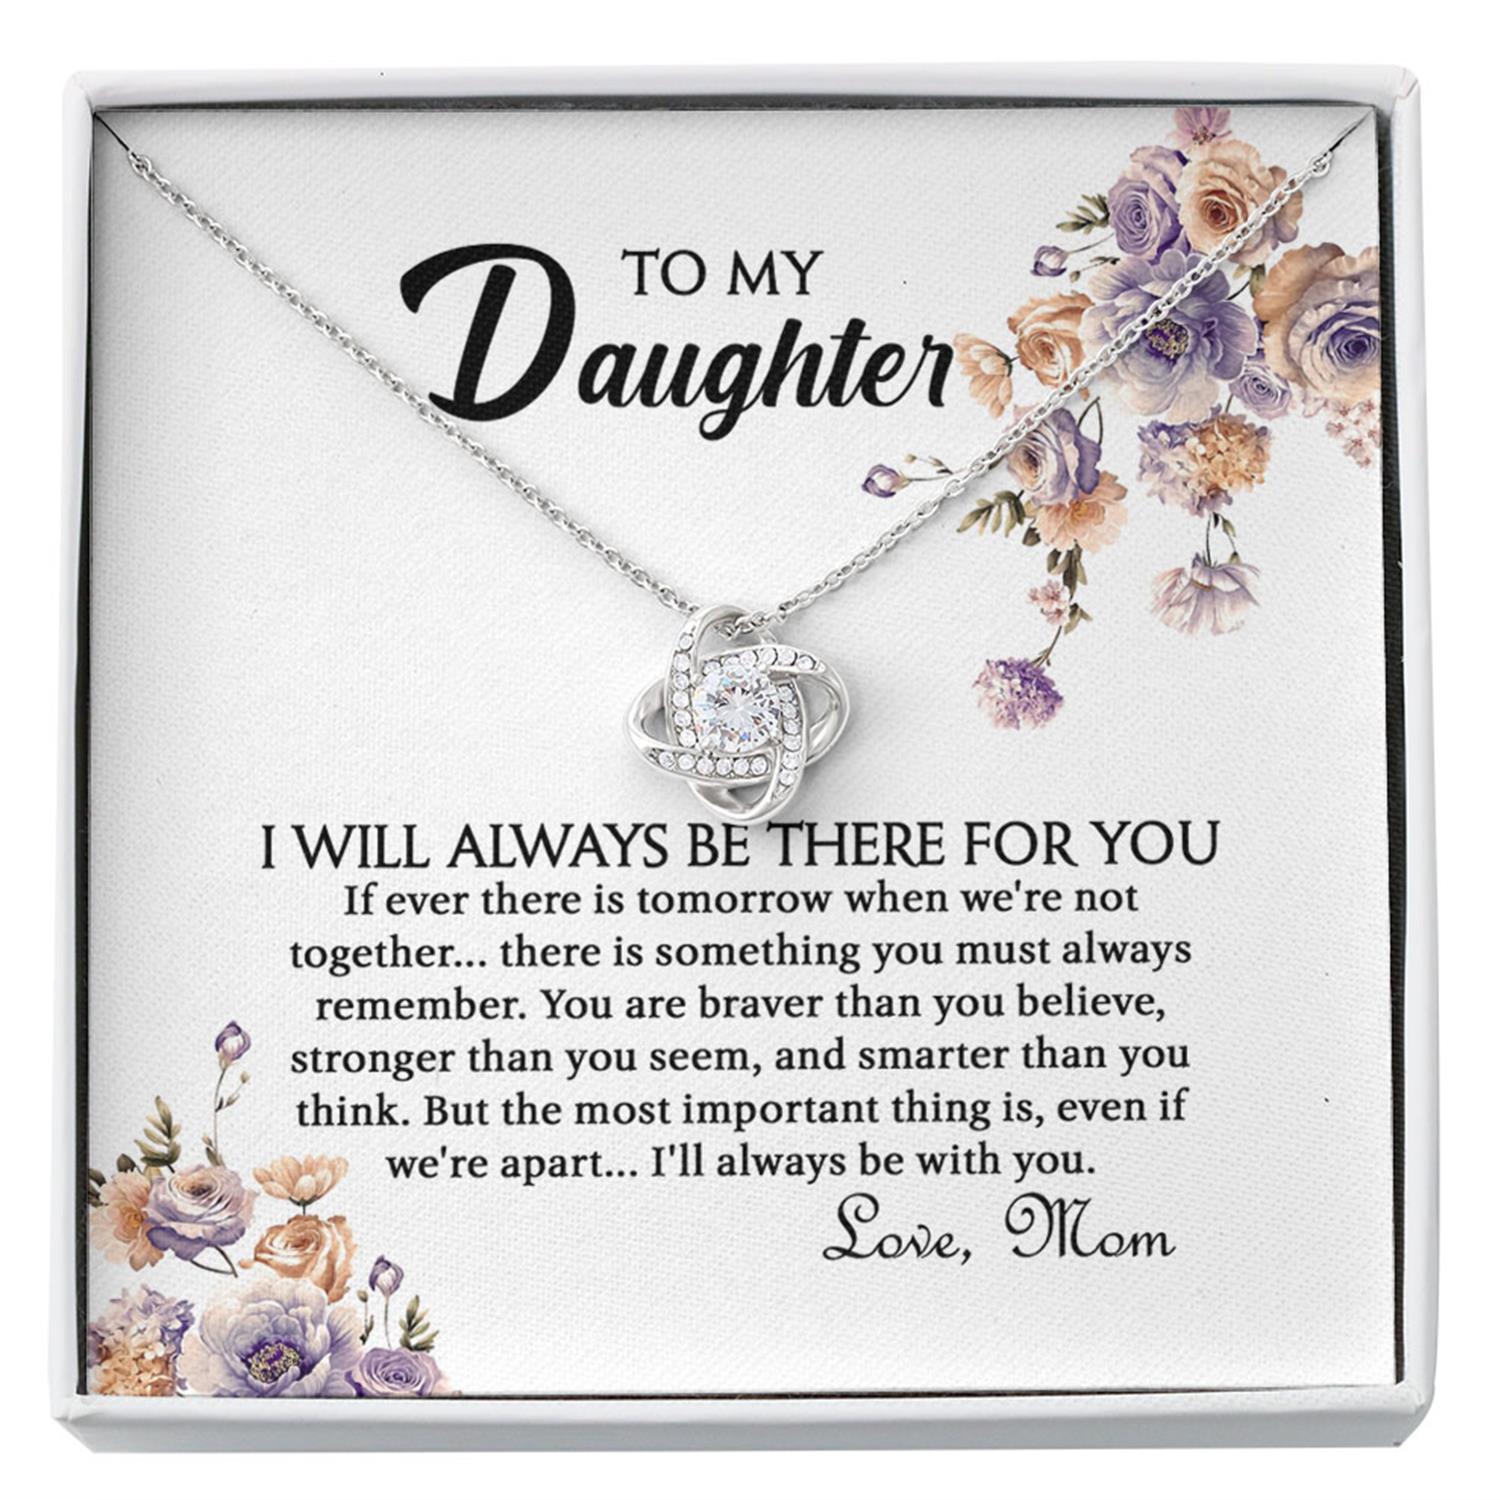 Daughter Necklace, To My Daughter Necklace Gift From Mom "There For You - Stronger Than You Seem" Custom Necklace